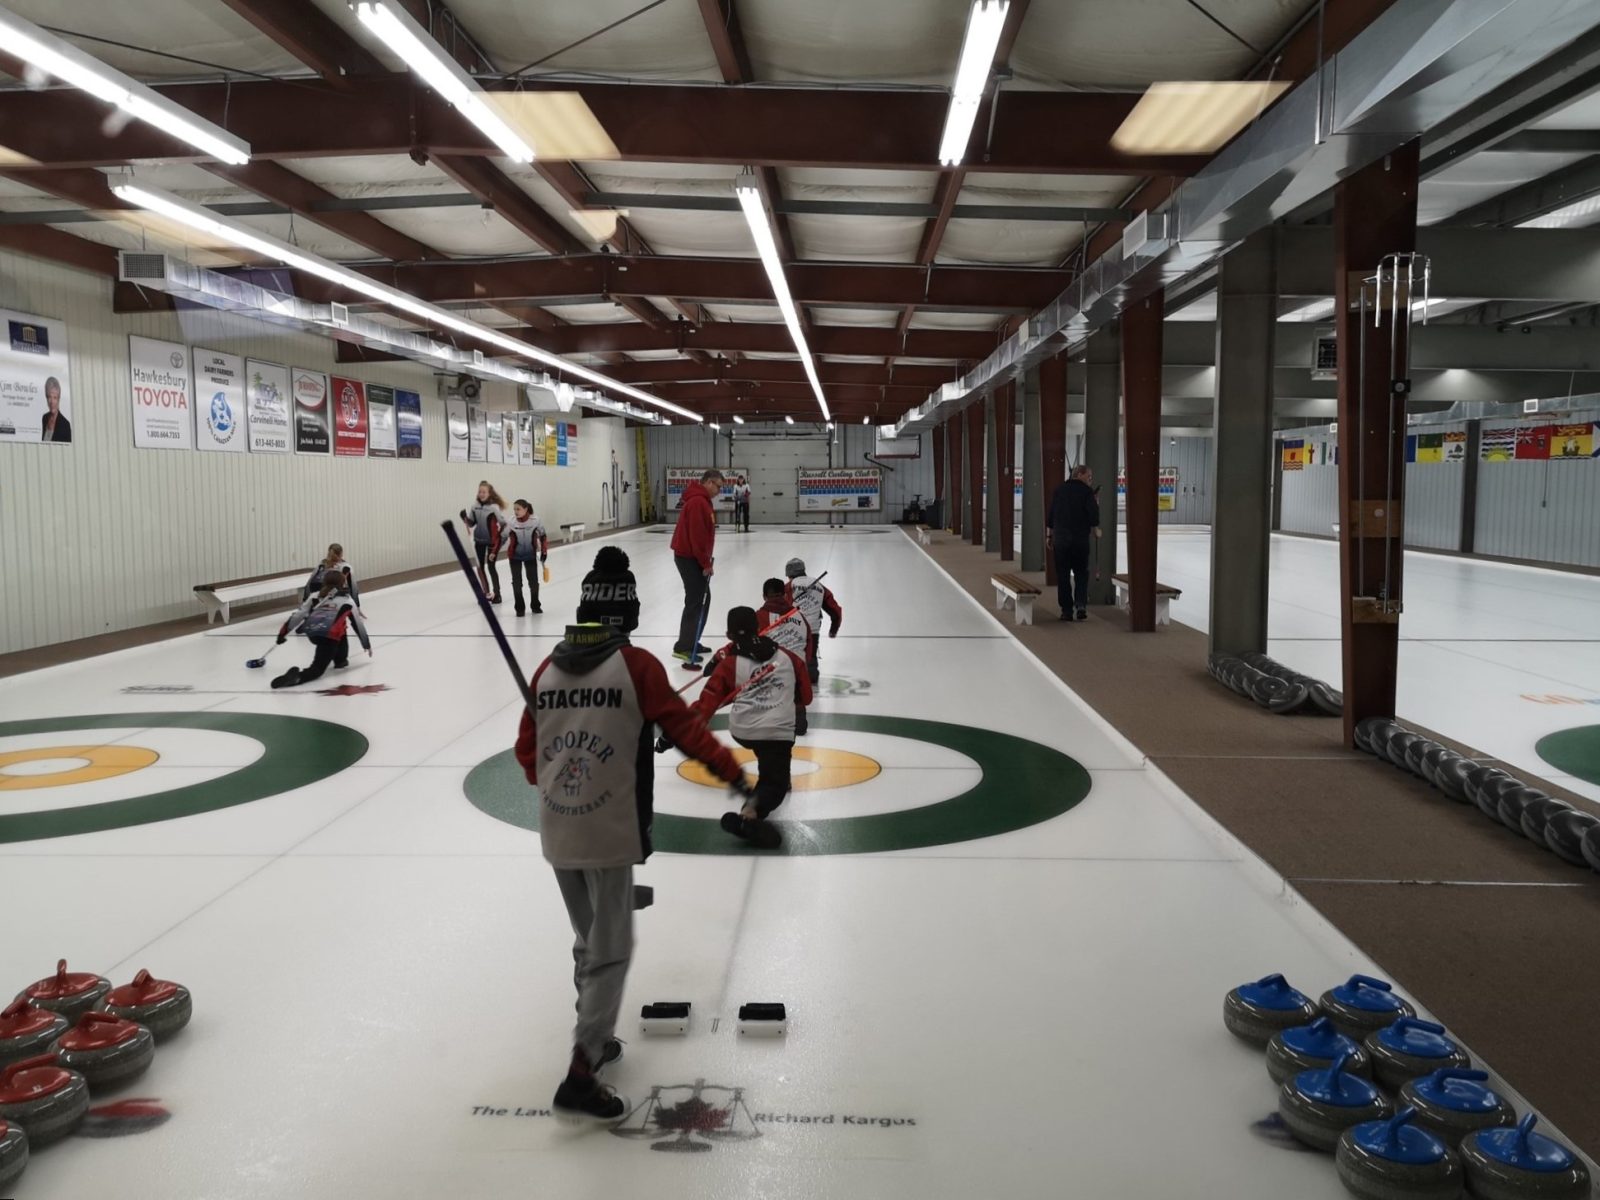 Russell welcomes Scottish curling teams